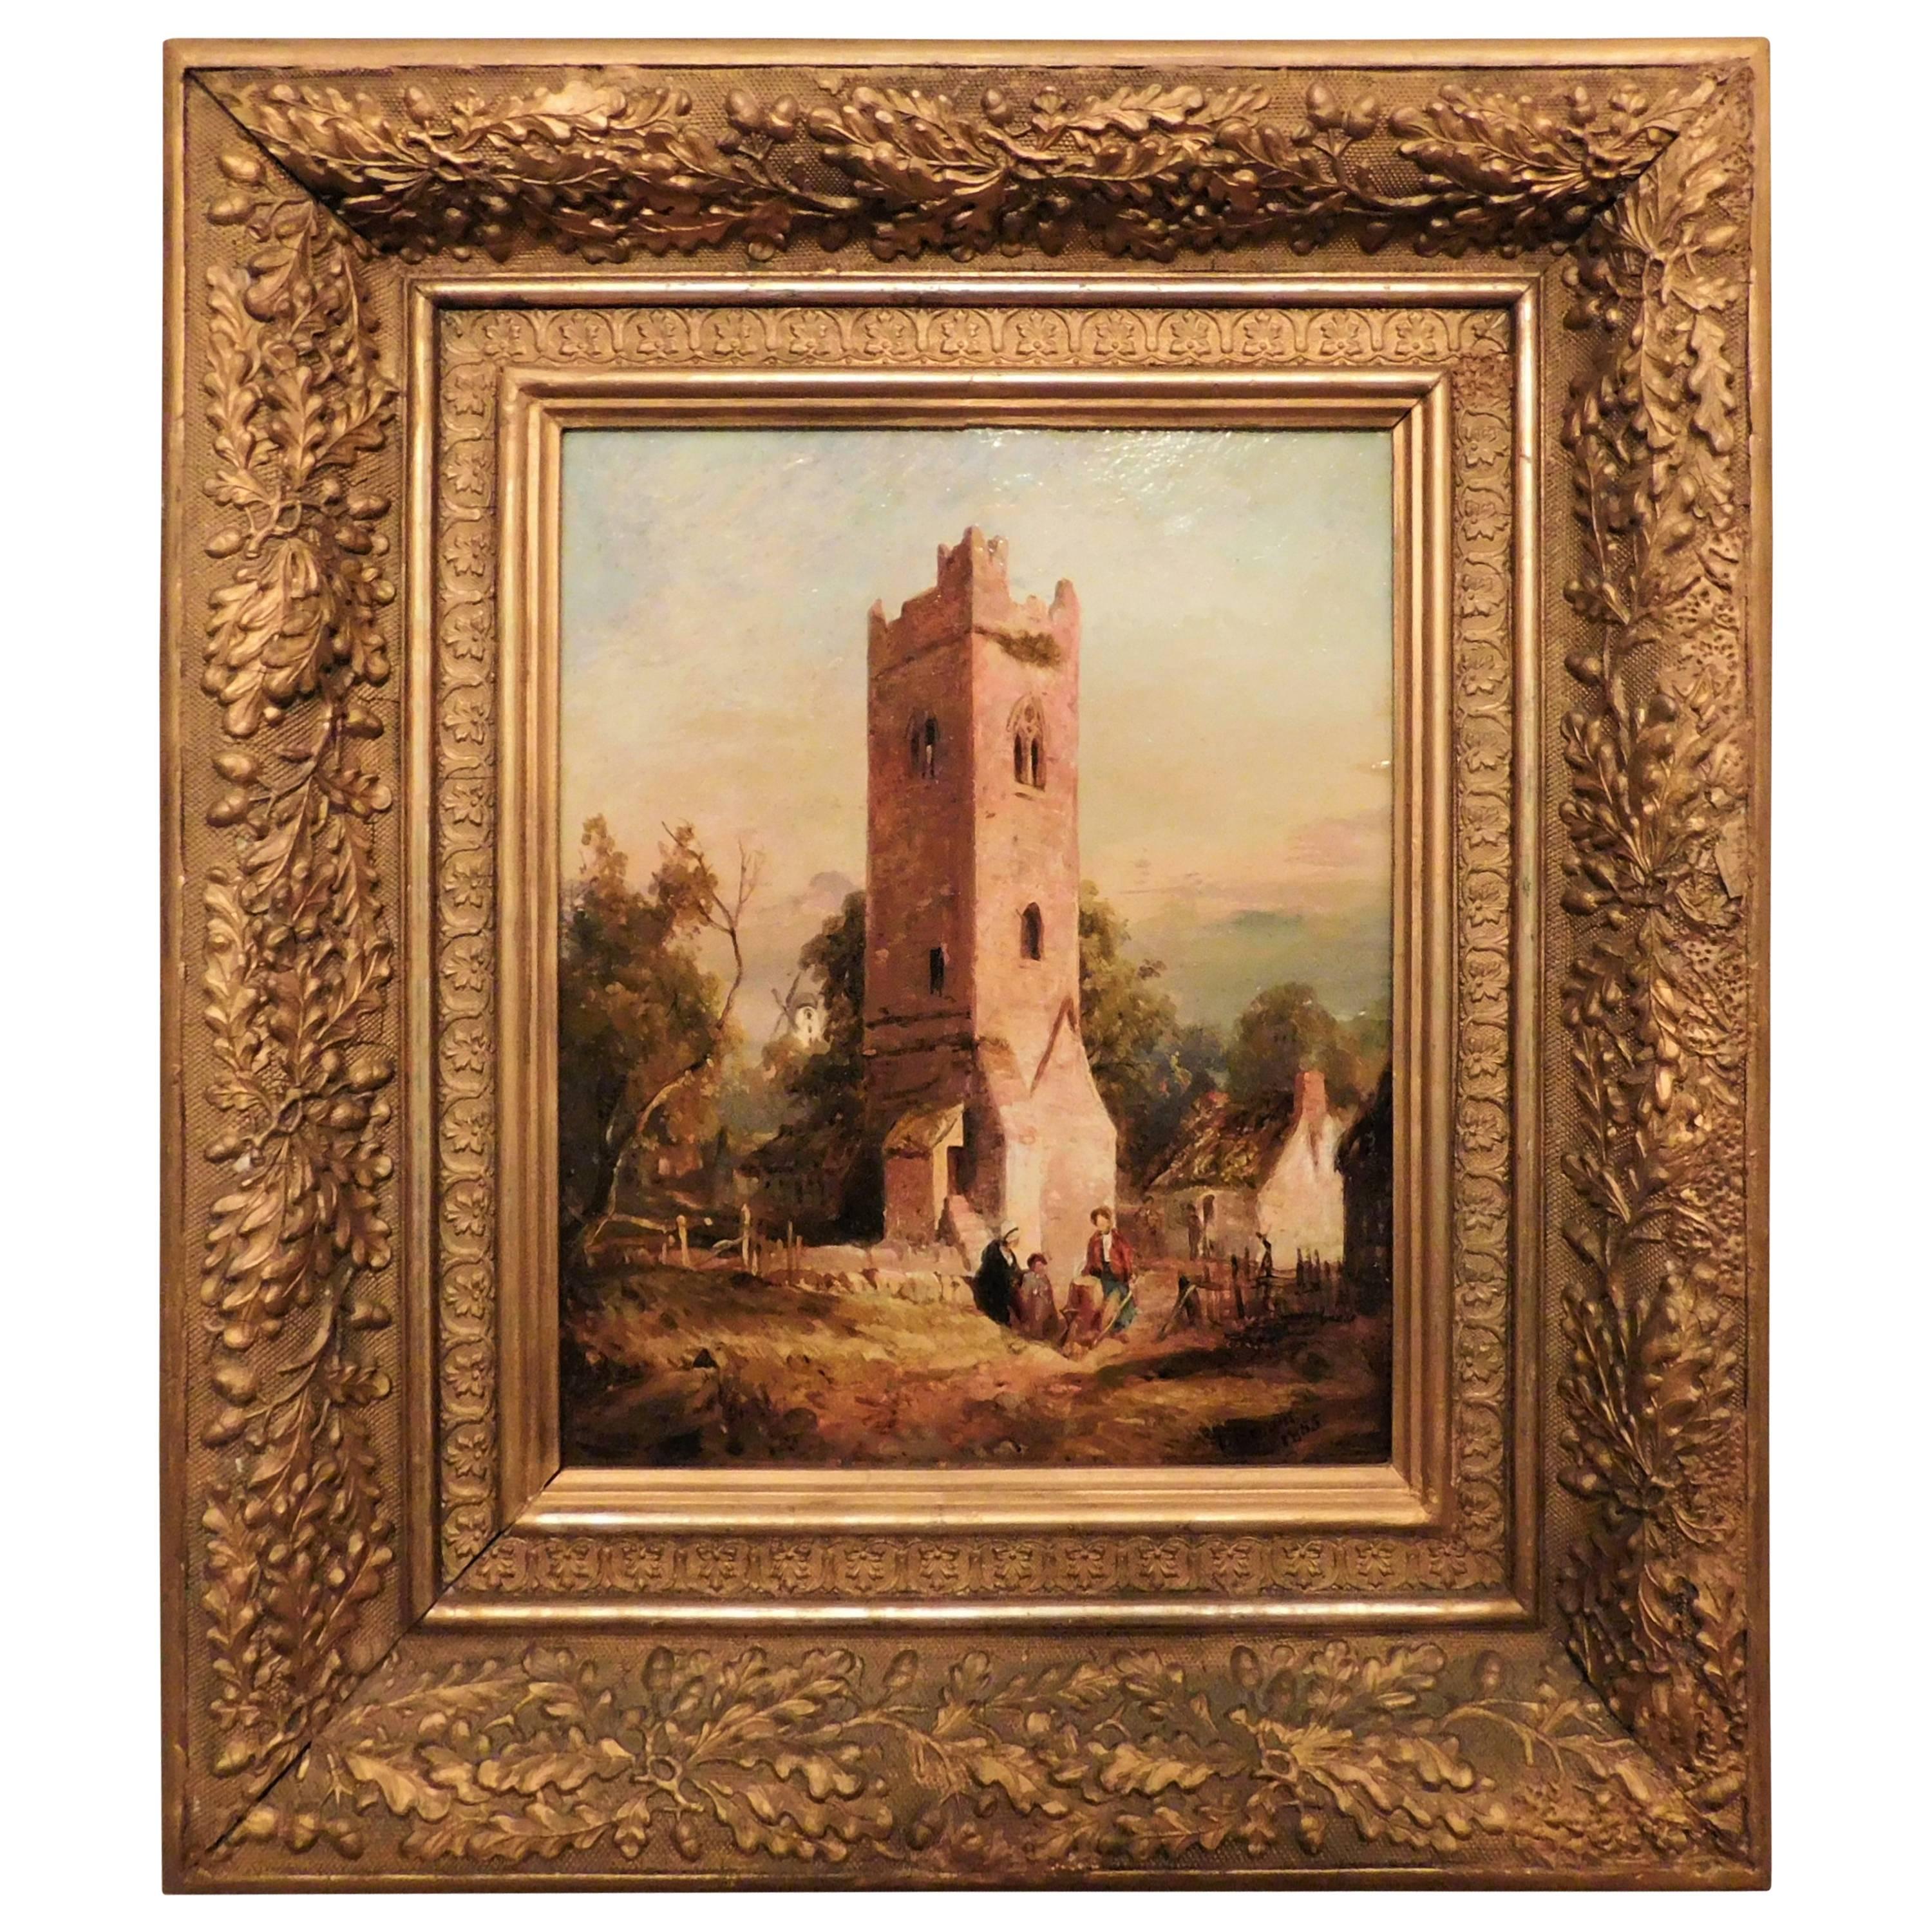 Oil on Board "Old Tower at Dundalk-County Louth, Ireland" by T Brown, 1855